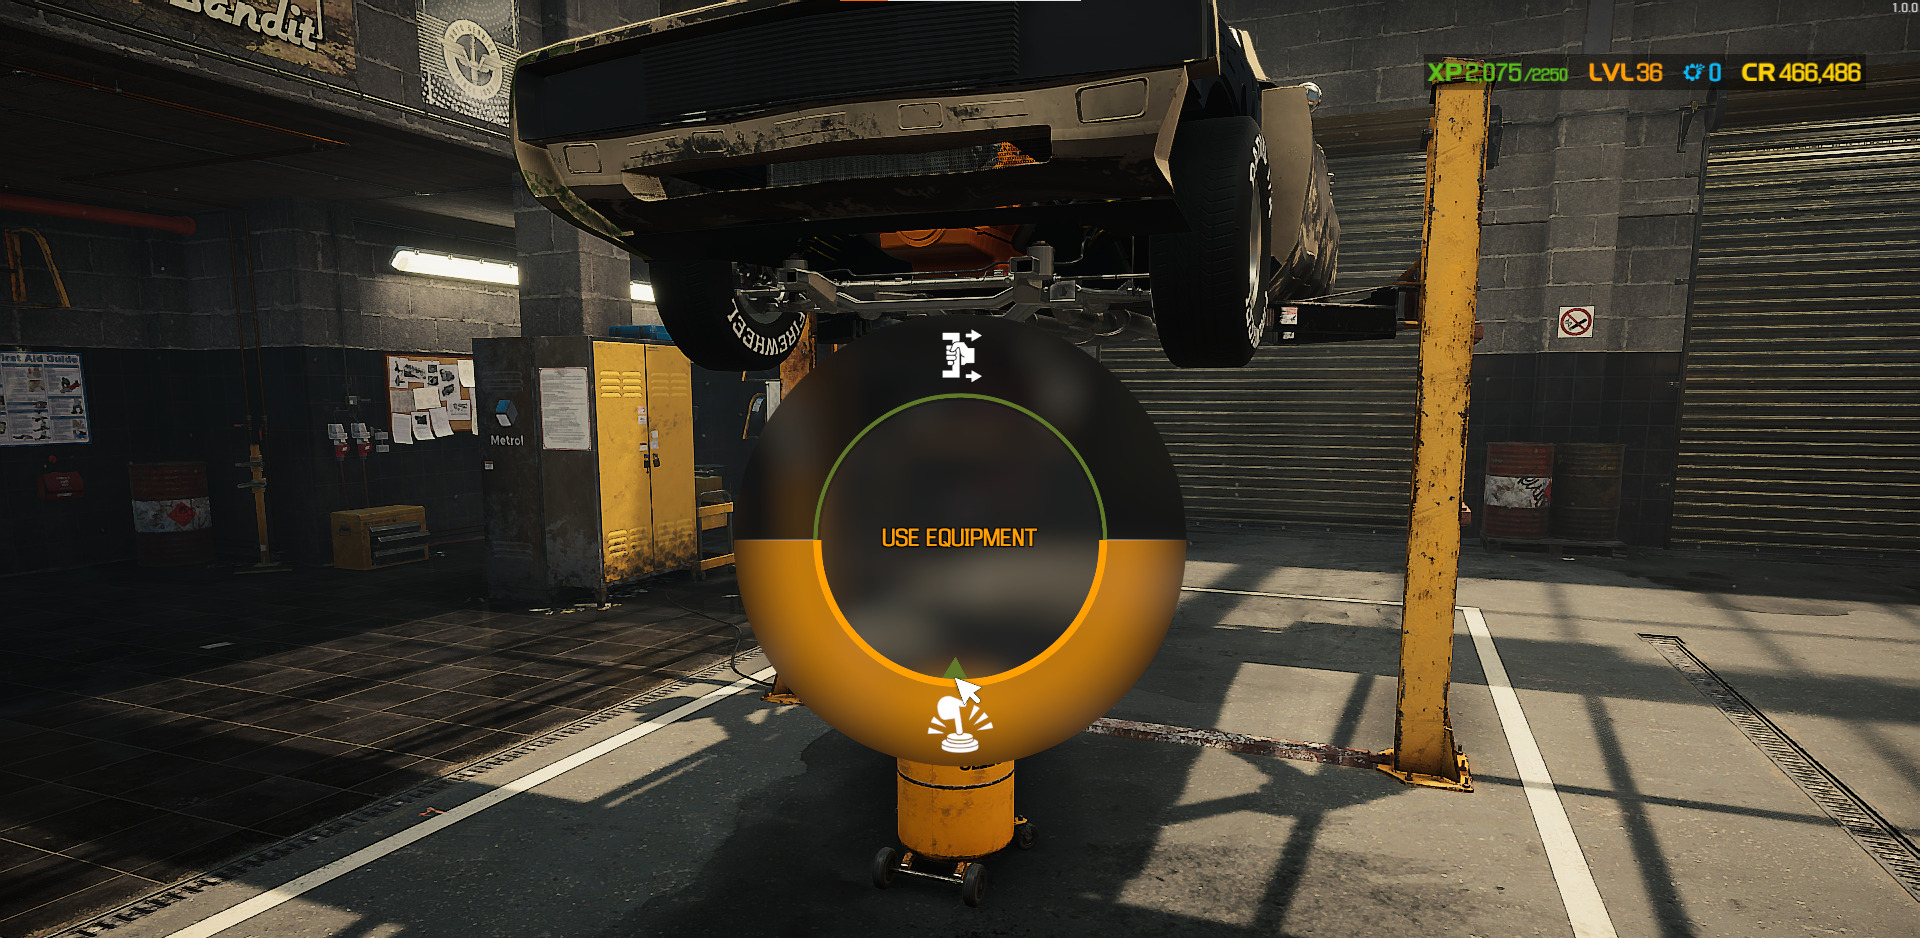 A screenshot showing the Use Equipment command on the Pie Wheel in Car Mechanic Simulator